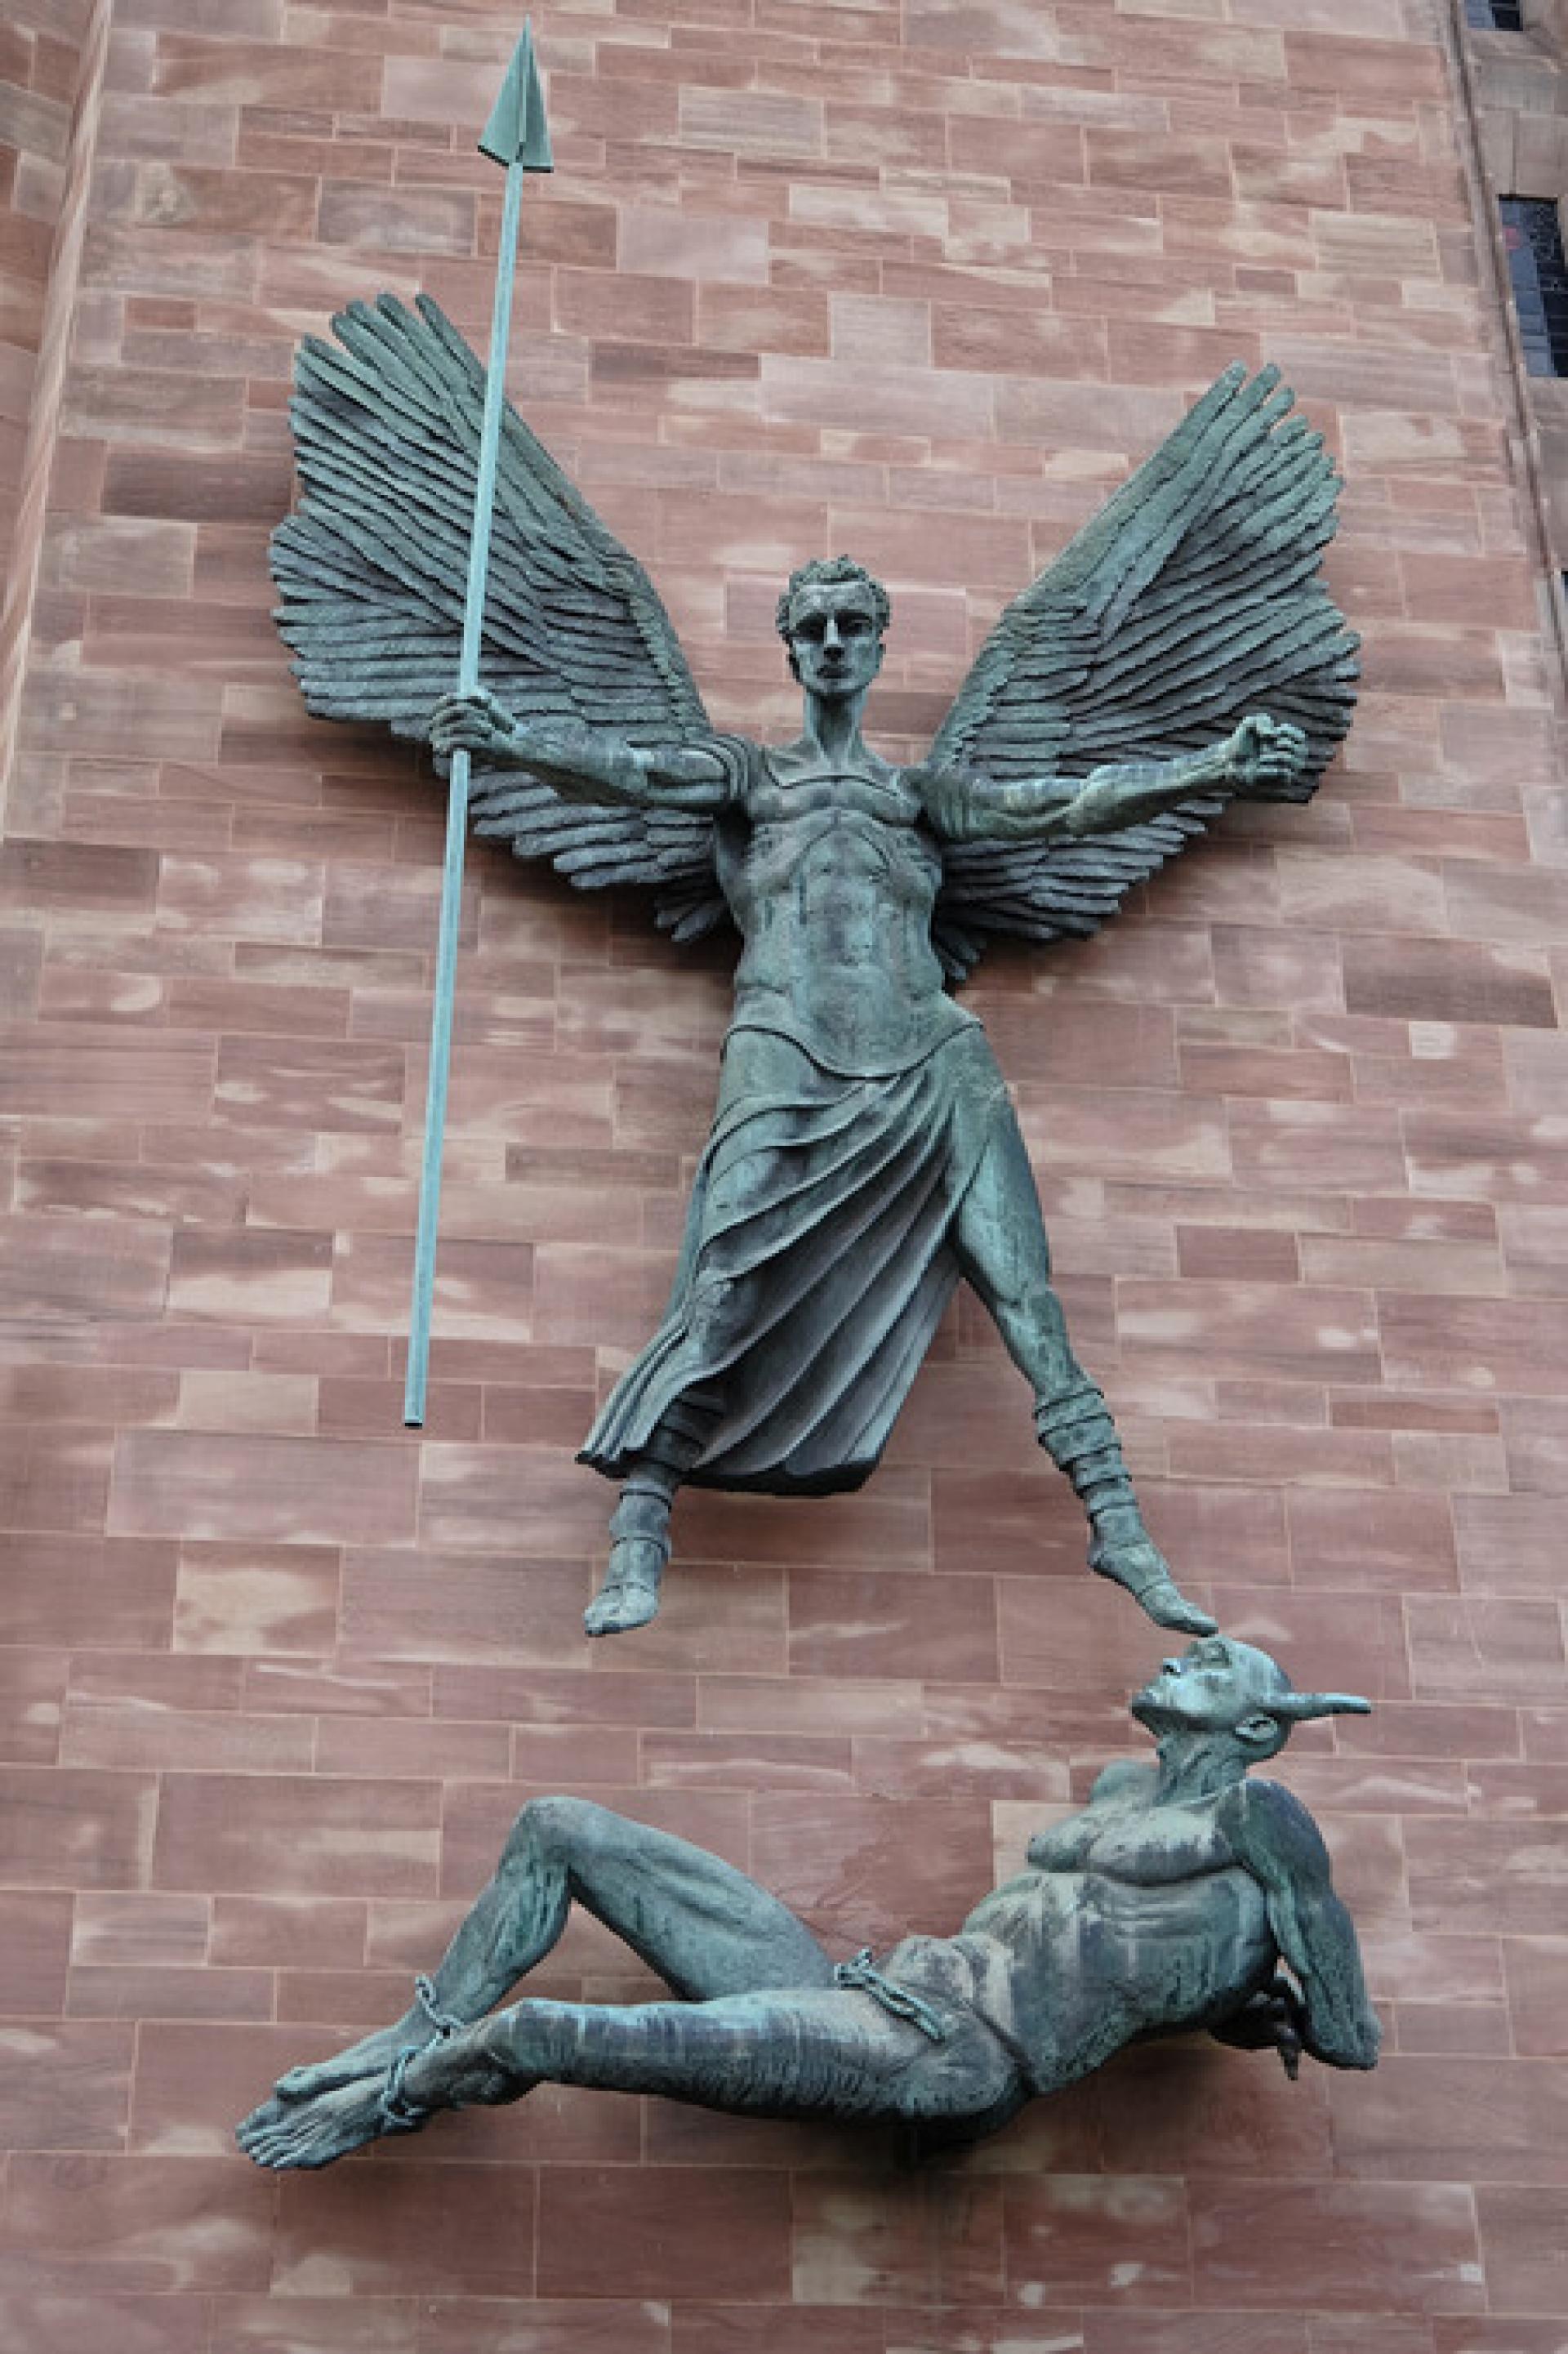 From Priory Street we find Sir Jacob Epstein’s large sculpture of Archangel Michael triumphing over the Devil. | Photo by Ross Nesbitt